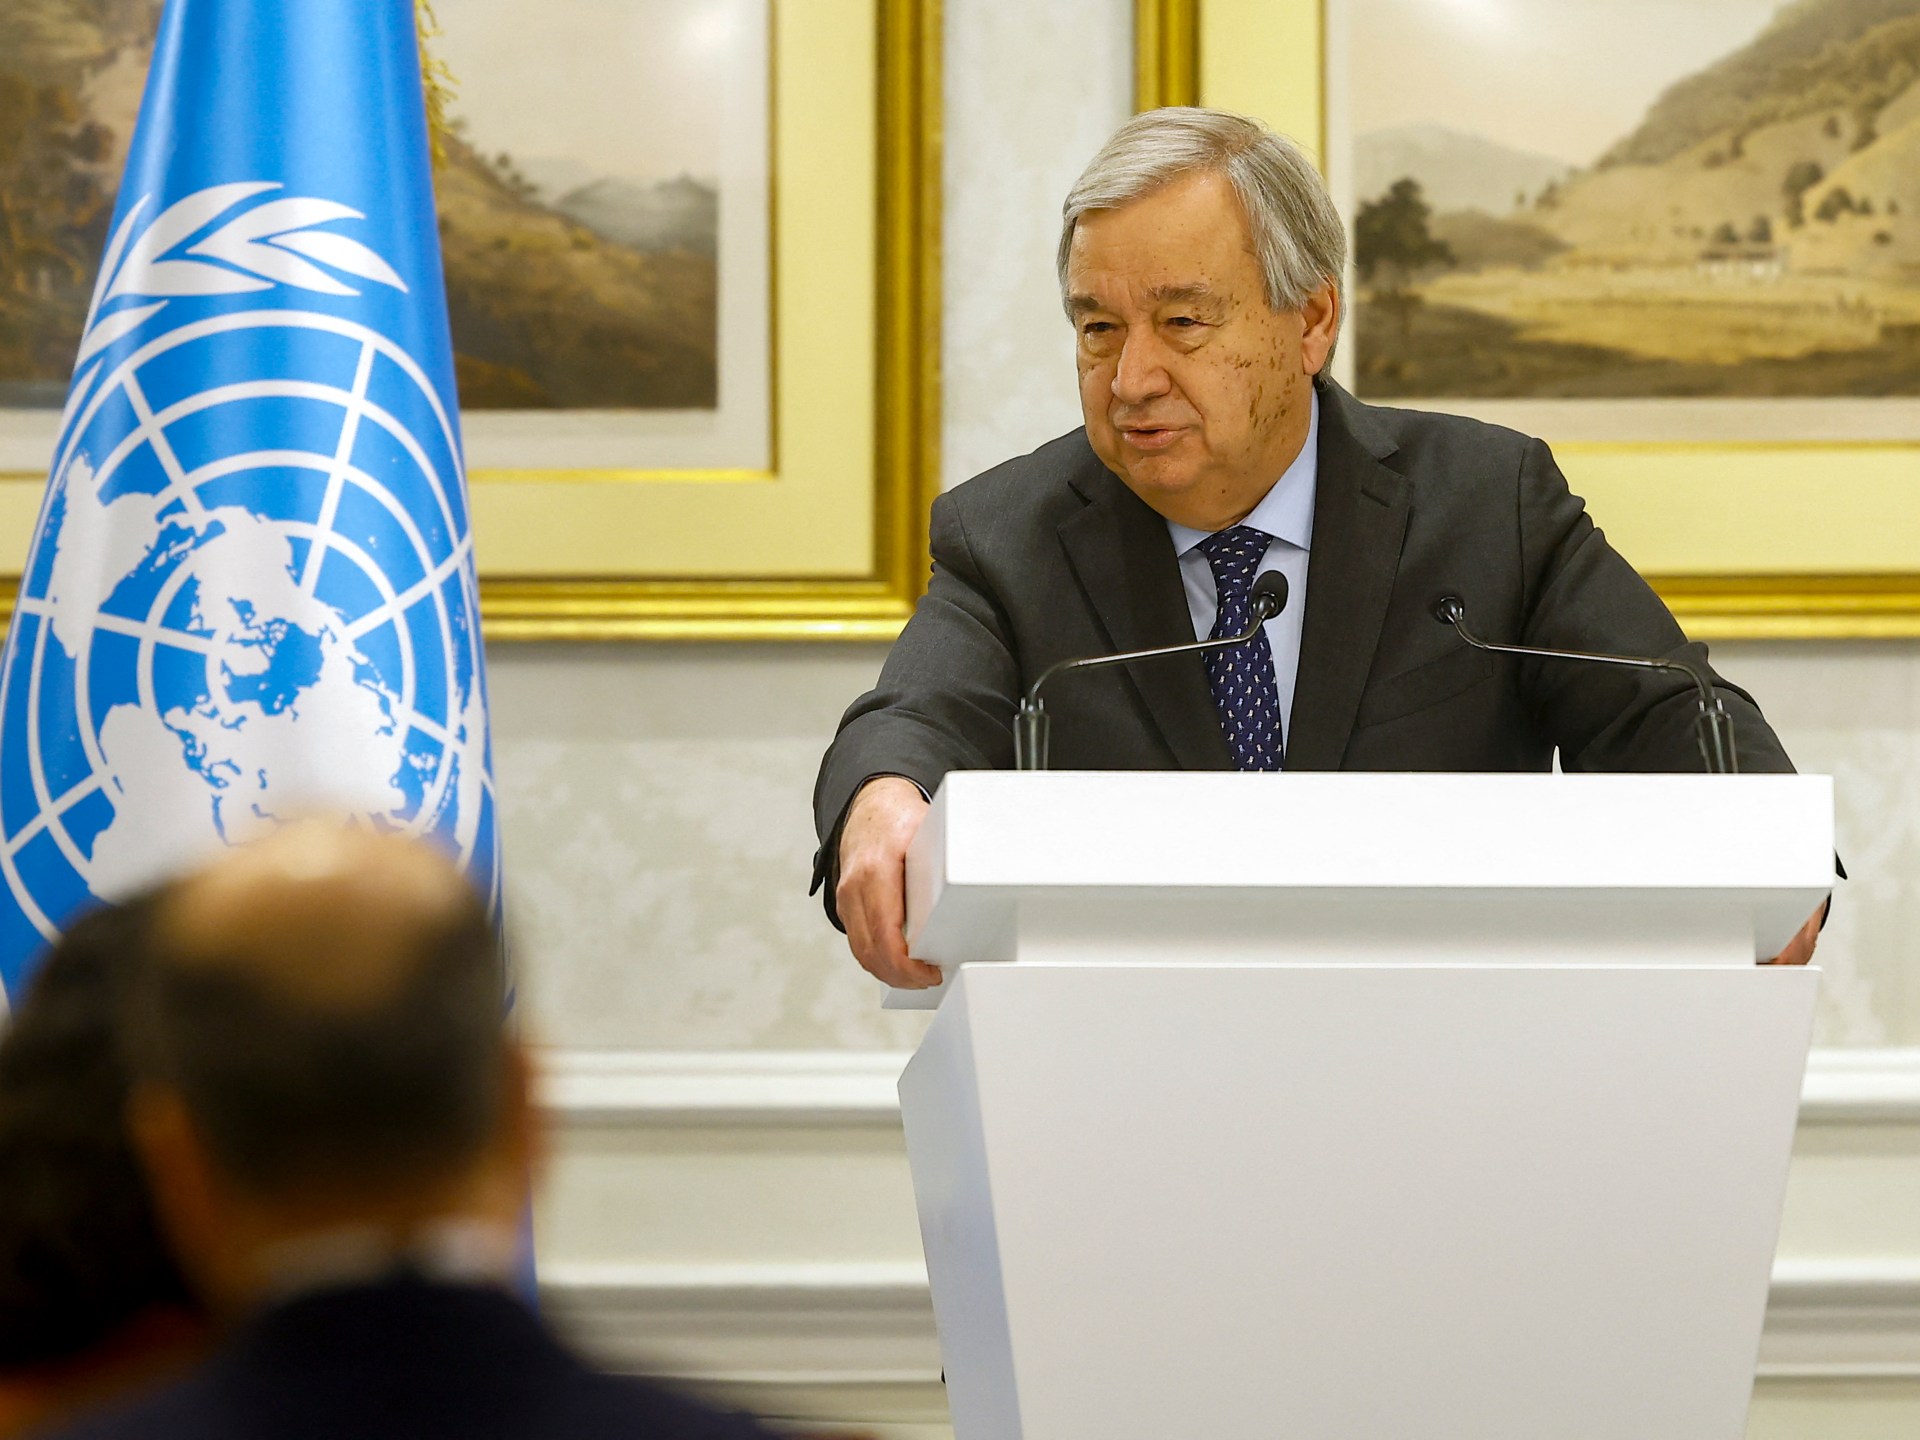 Taliban’s conditions to attend UN meeting ‘unacceptable’, Guterres says | United Nations News